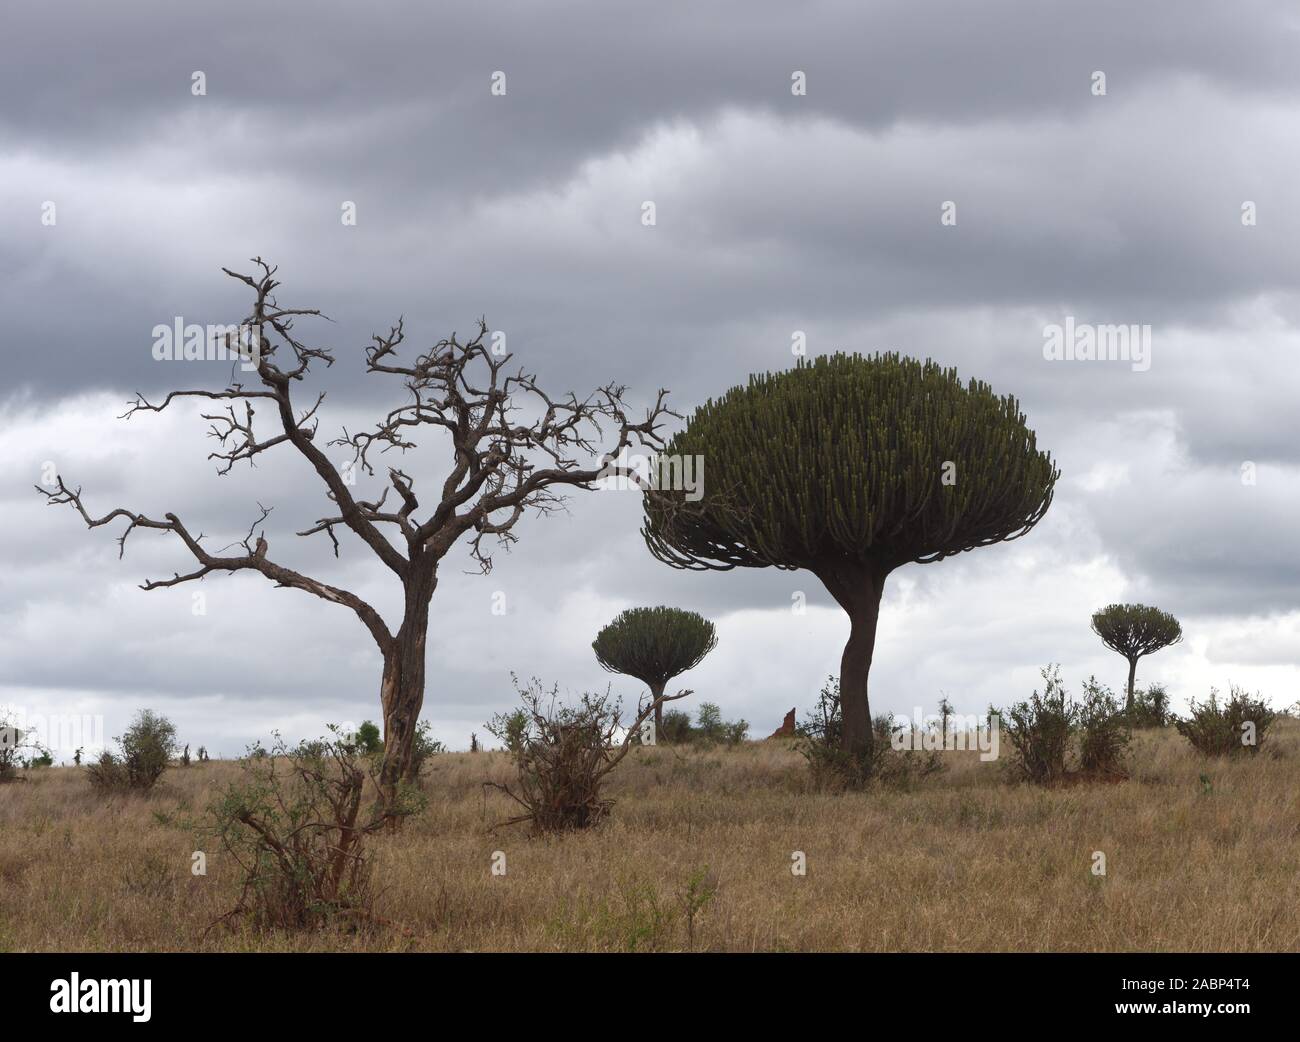 Part of the Tarangire National Park is a flat, grassy landscape with the occasional giant succulent euphorbia  tree (Euphorbia ingens). Tarangire Nati Stock Photo